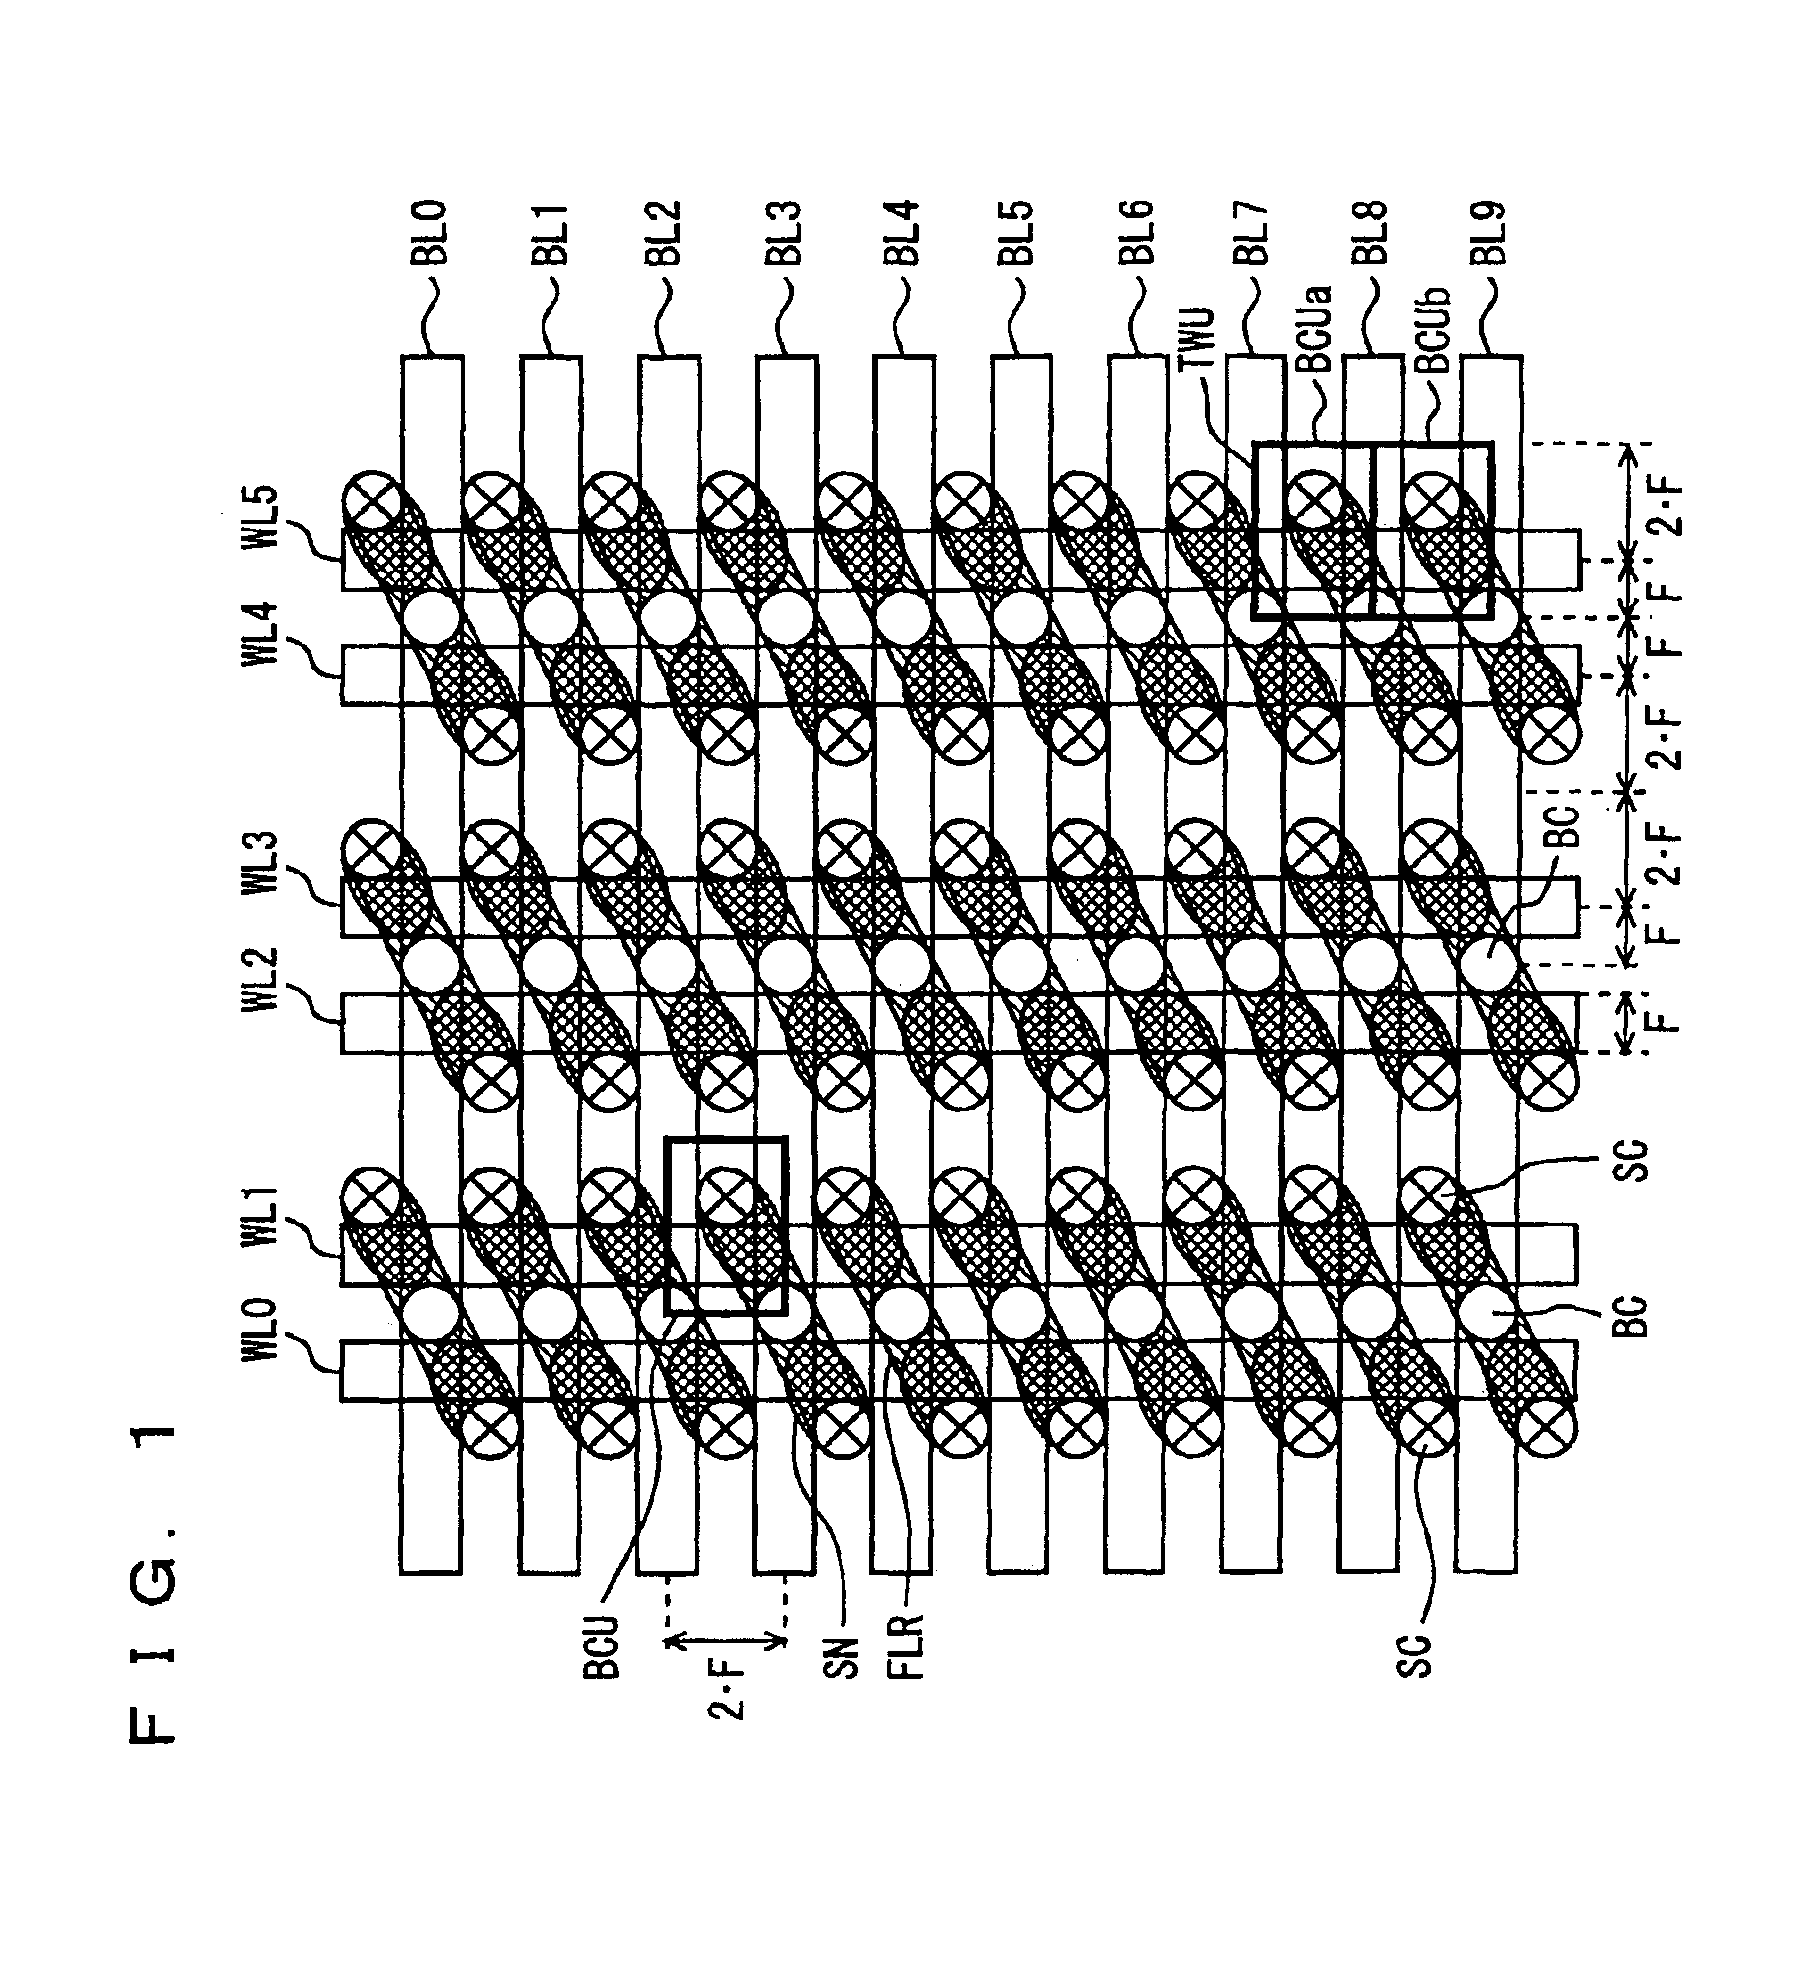 Semiconductor memory device with memory cells arranged in high density